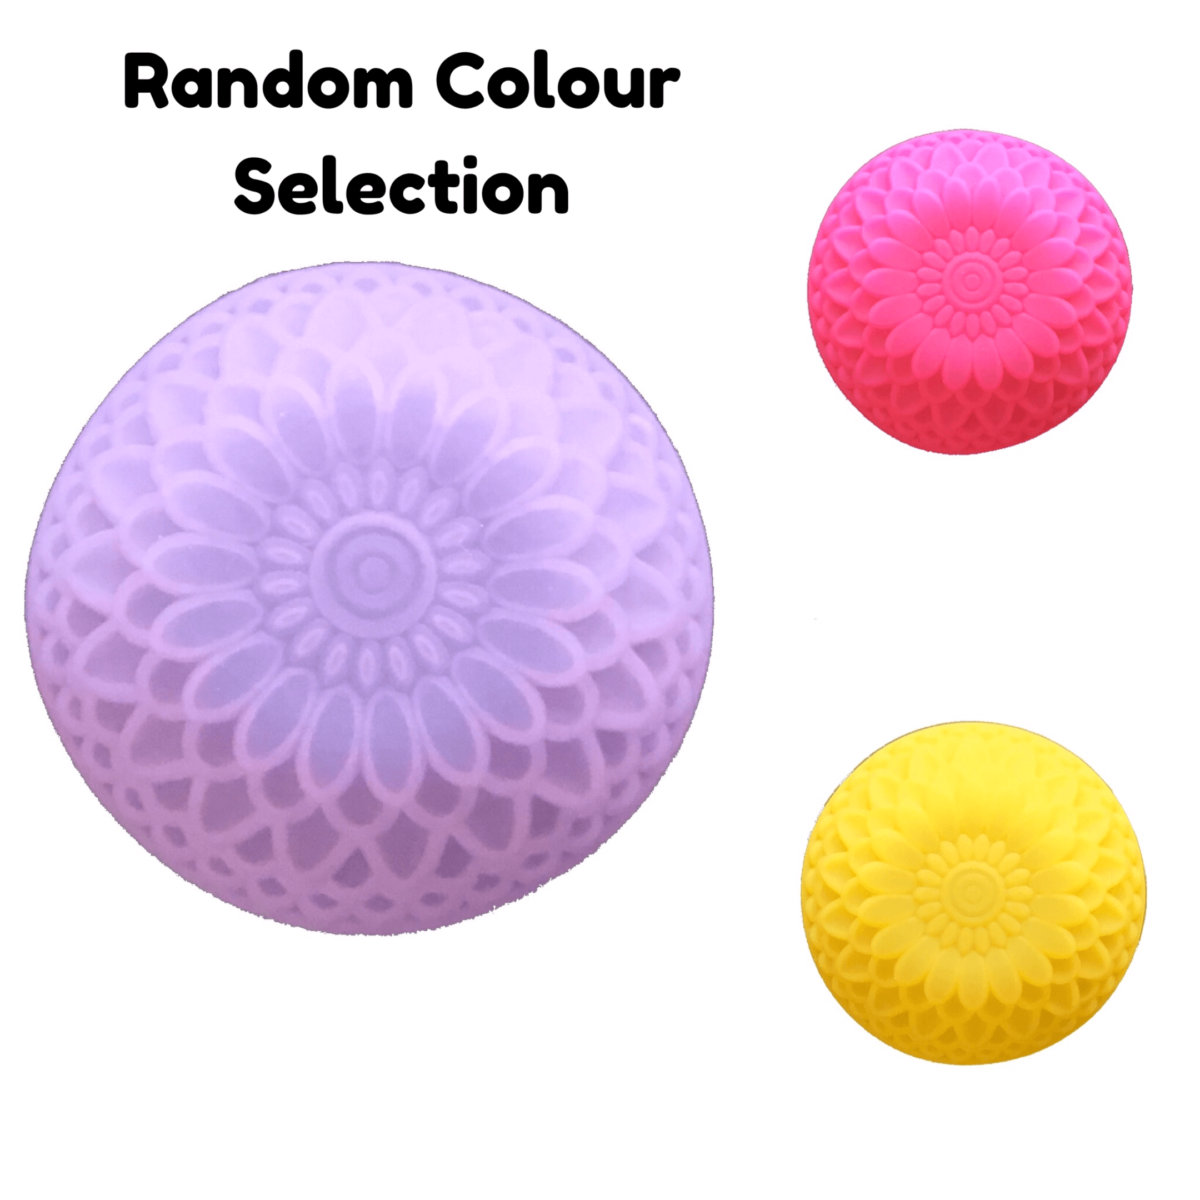 5cm dahlia flower single cavity silicone mould in purple, magenta and yellow with the text 'random colour selelction'